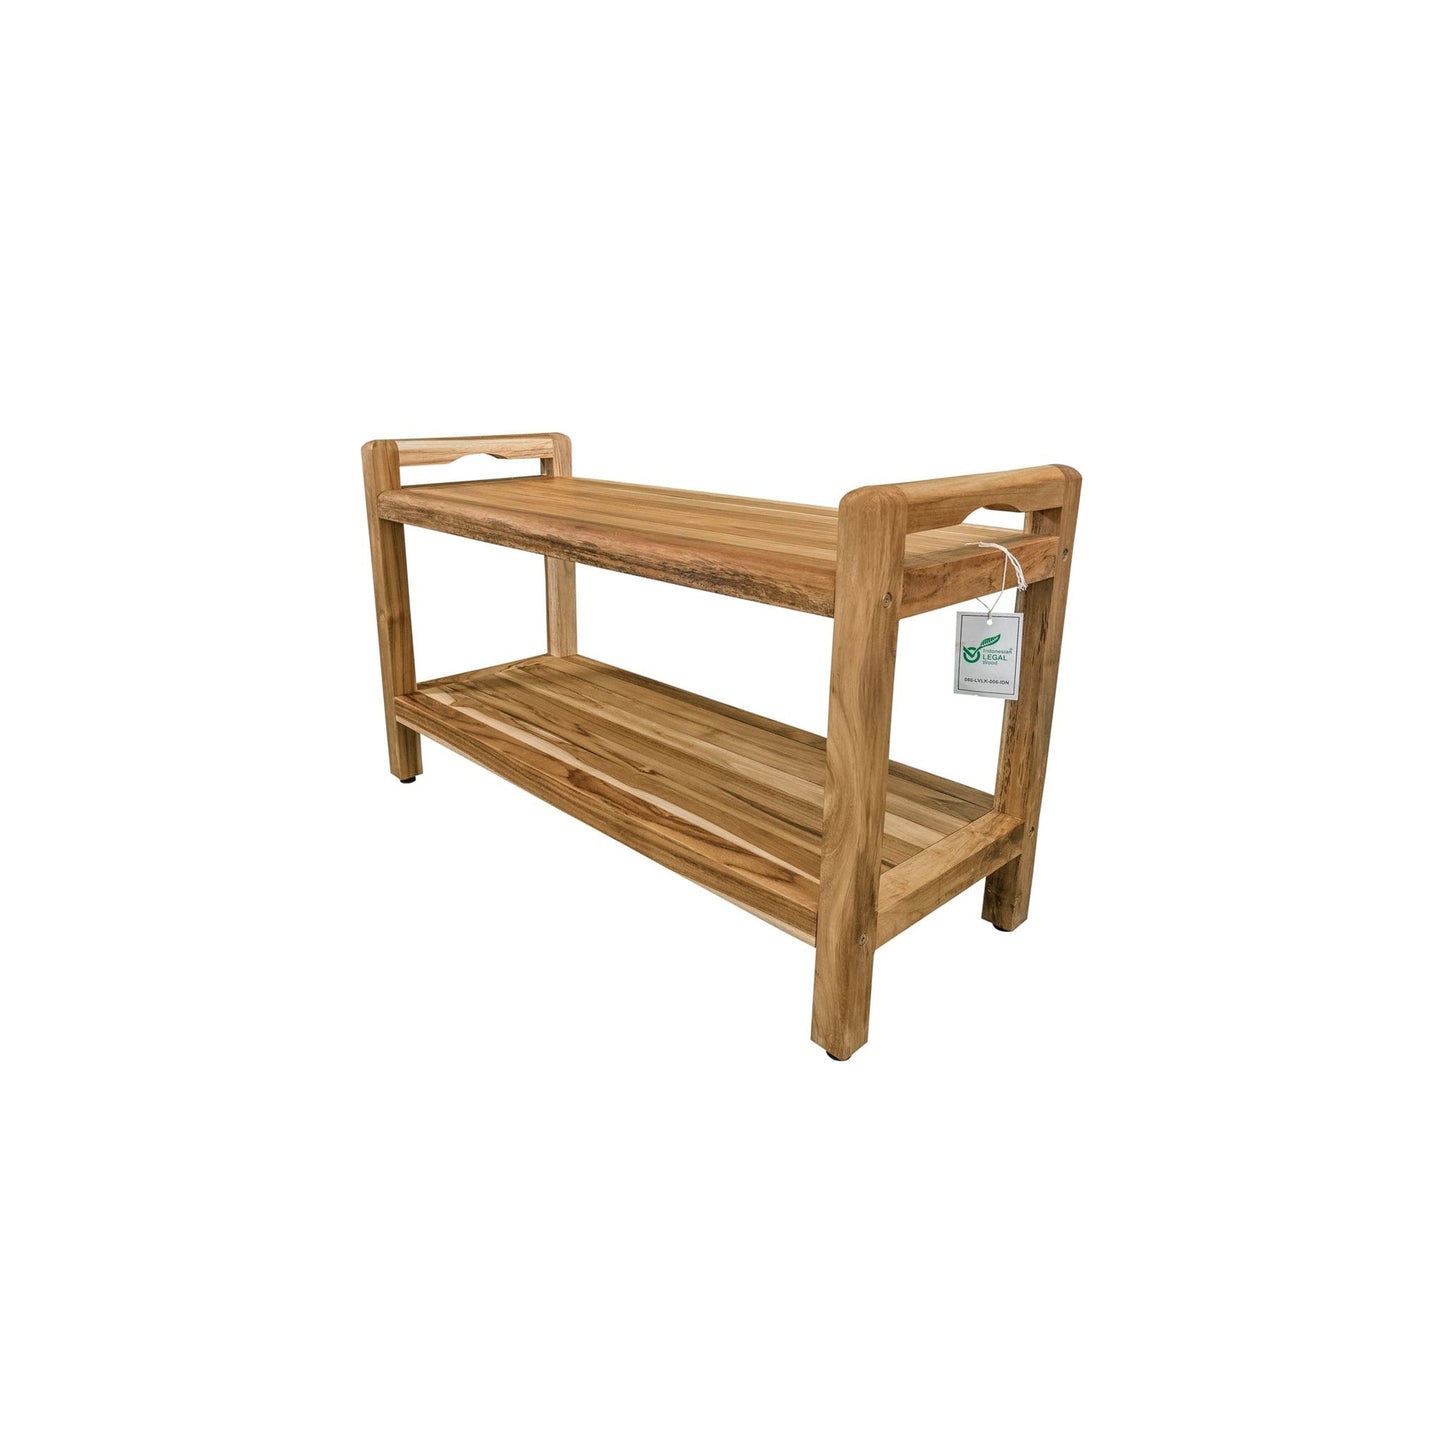 EcoDecors Eleganto 35" EarthyTeak Solid Teak Wood Shower Bench With LiftAide Arms and Shelf